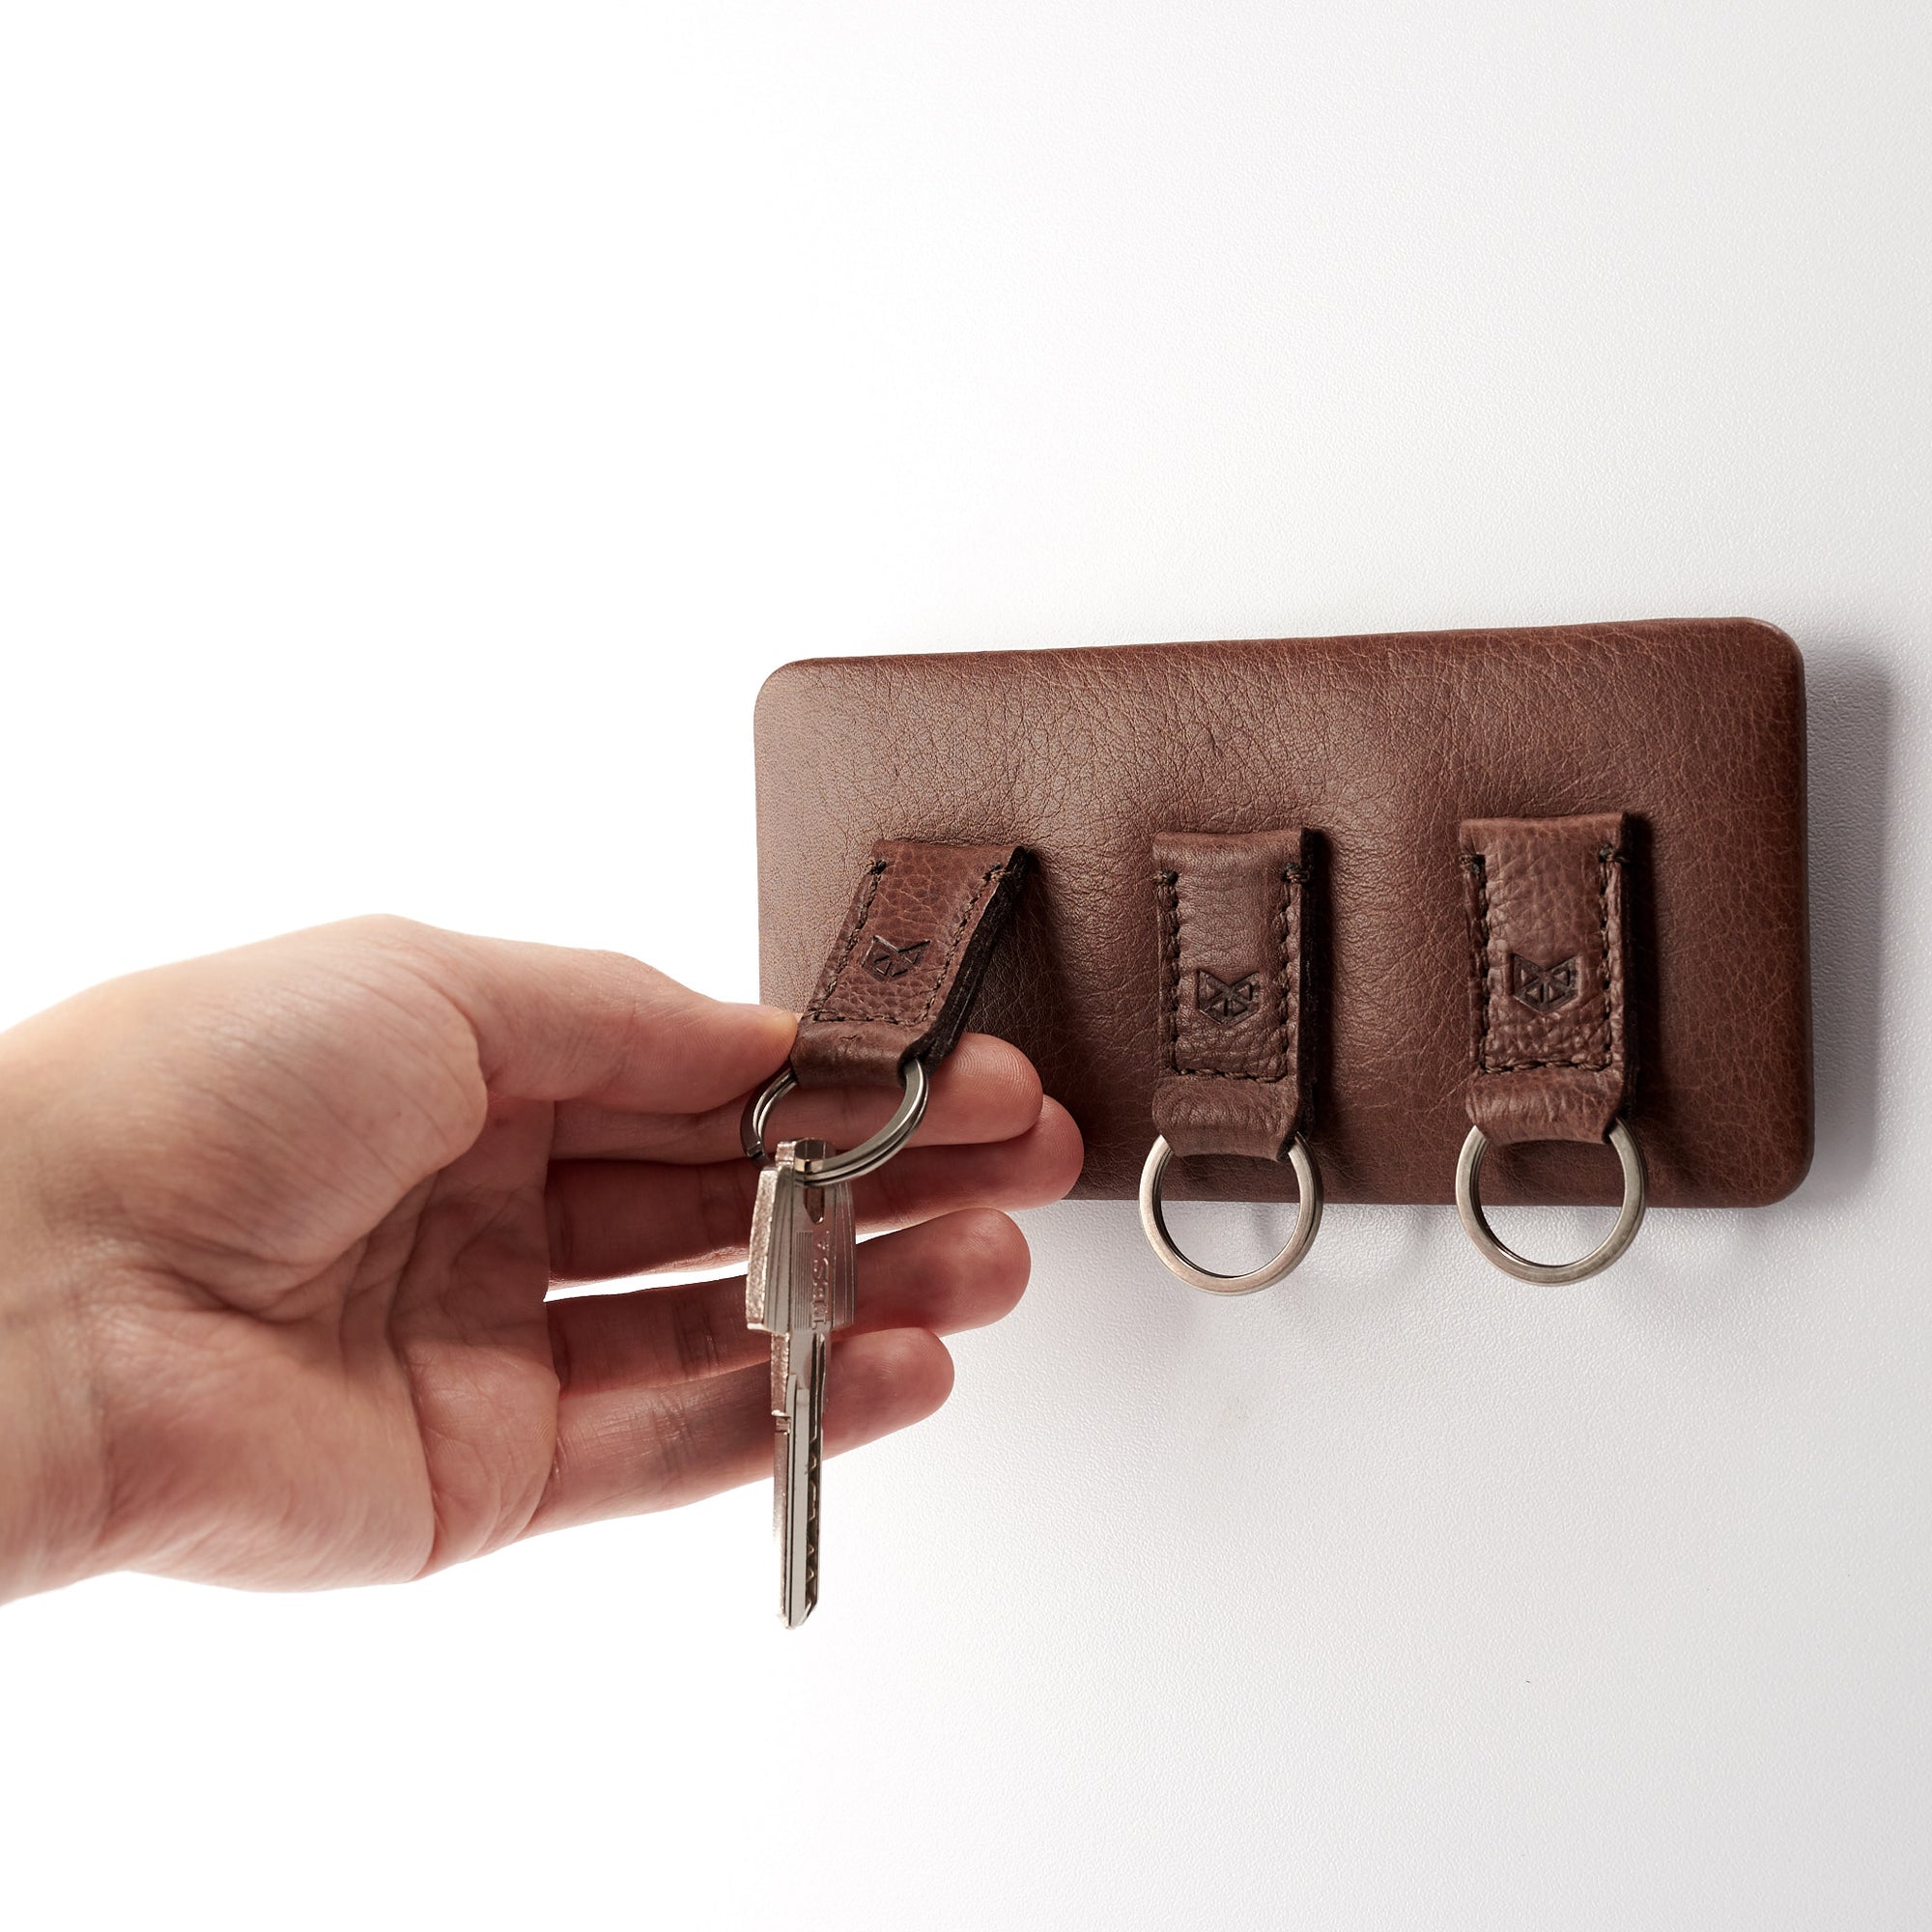 Magnetic key hanger organizer. Brown leather magnetic key holder for wall decor. Entryway organizer decor. Home decoration. Keys organizer